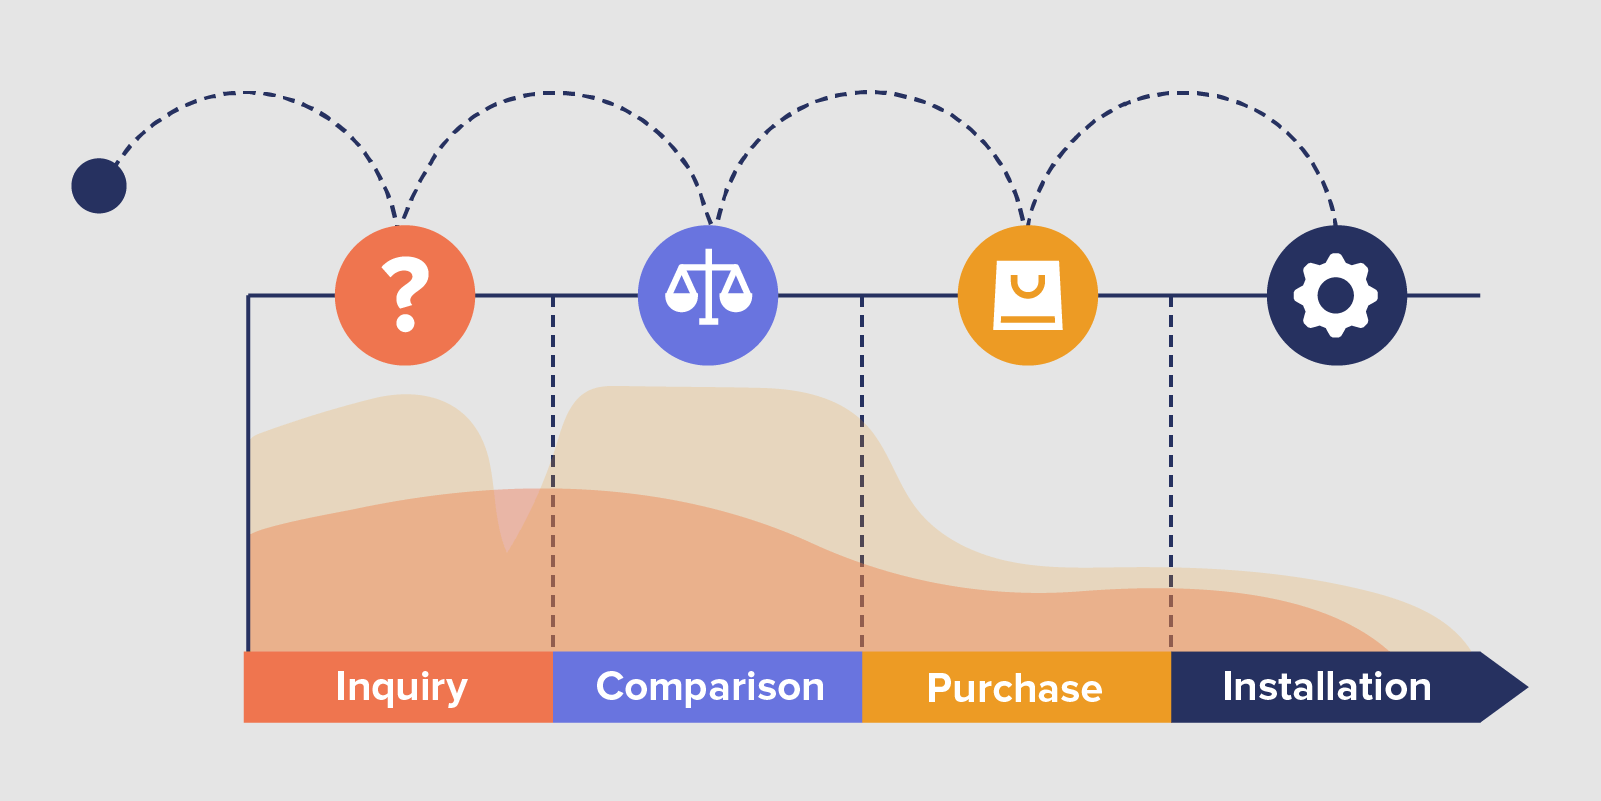 User Journey Map example - showing 4 stages in the user journey